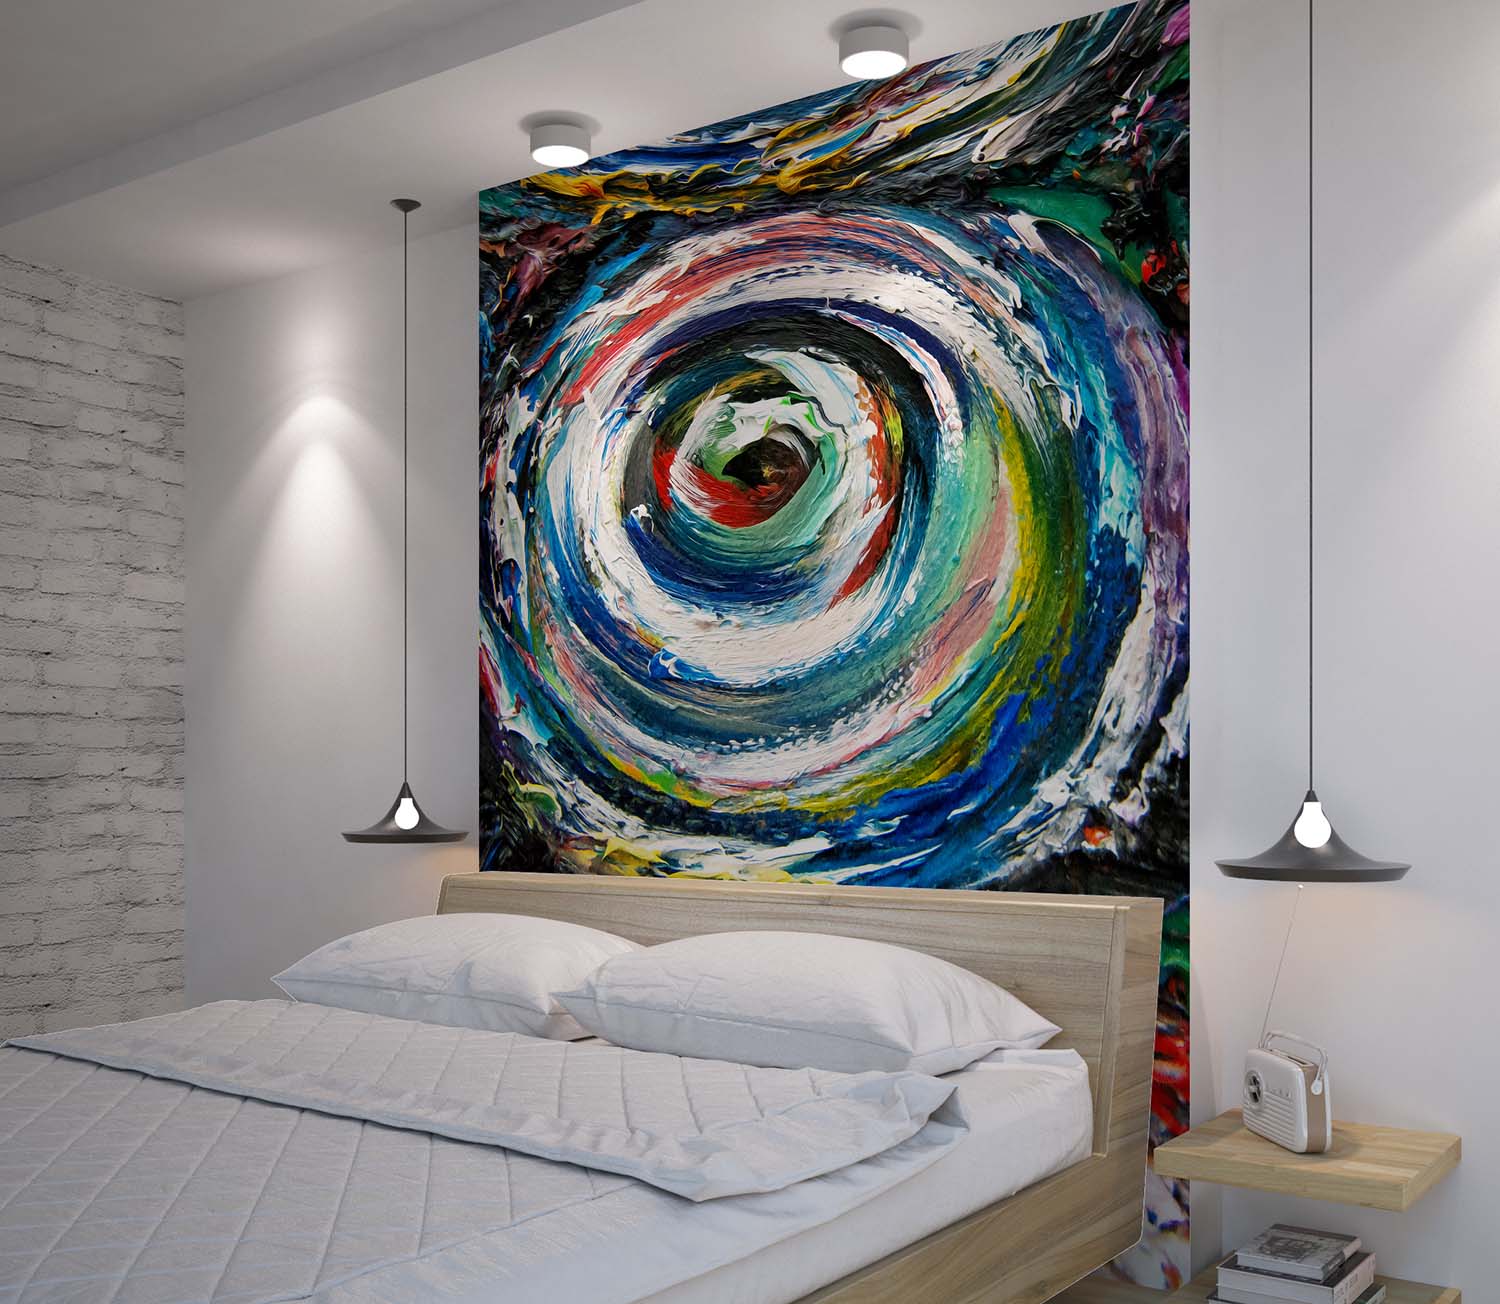 Vid-19 Quadratic Vortex abstract art wall mural behind a king size bed by Doug LaRue